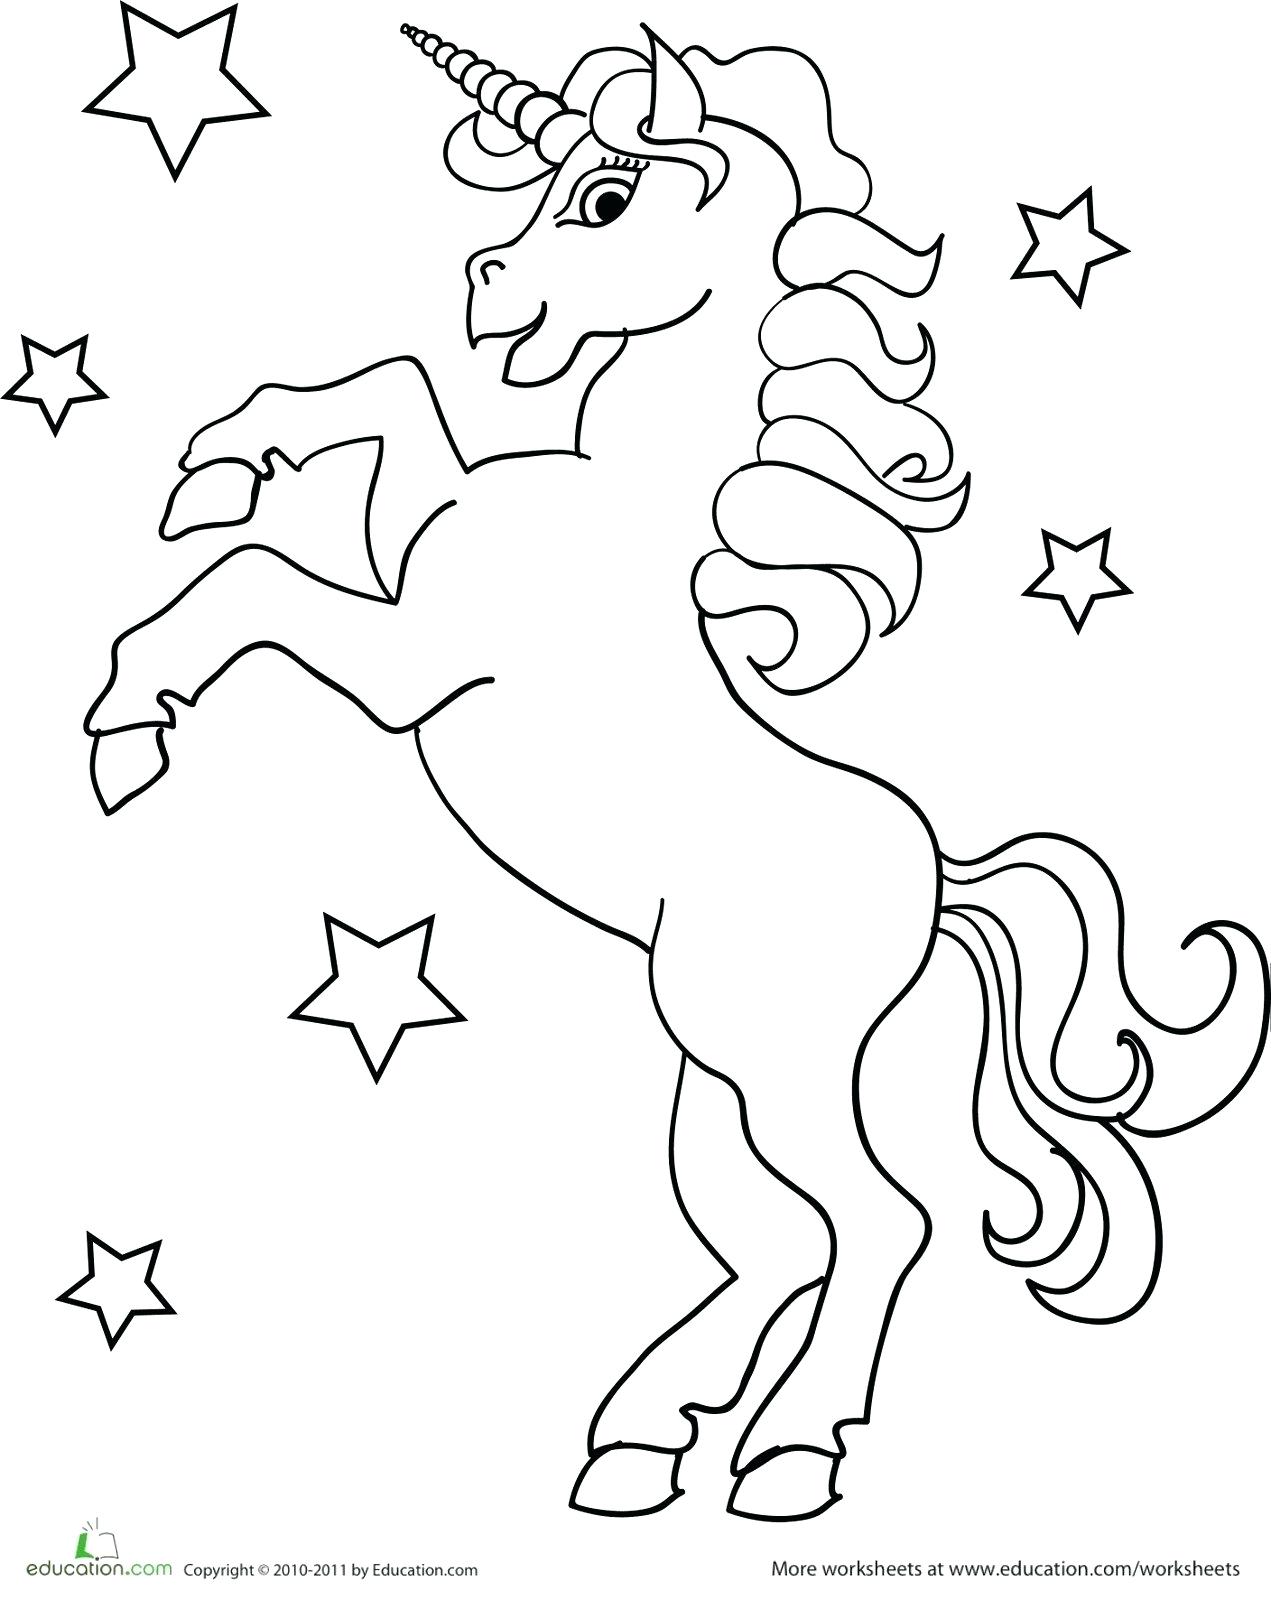 Coloring Pages : Coloring Pages Unicorn Head Tattoos For ...